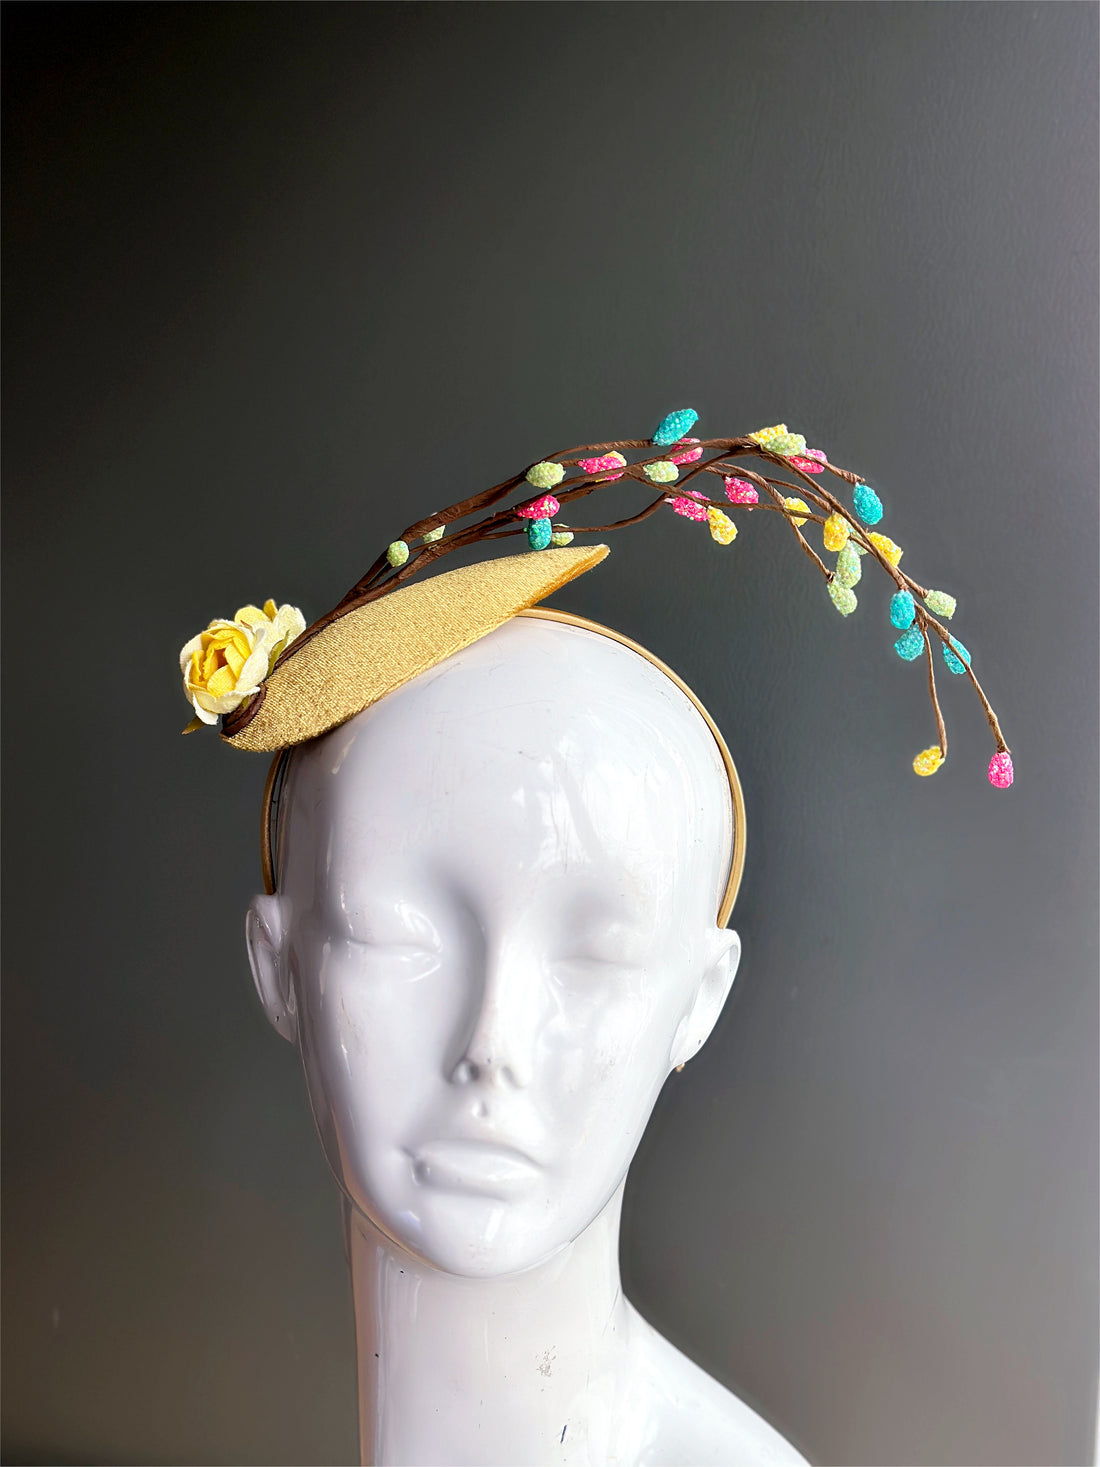 Fascinator headband with yellow flowers and colorful bulbs.